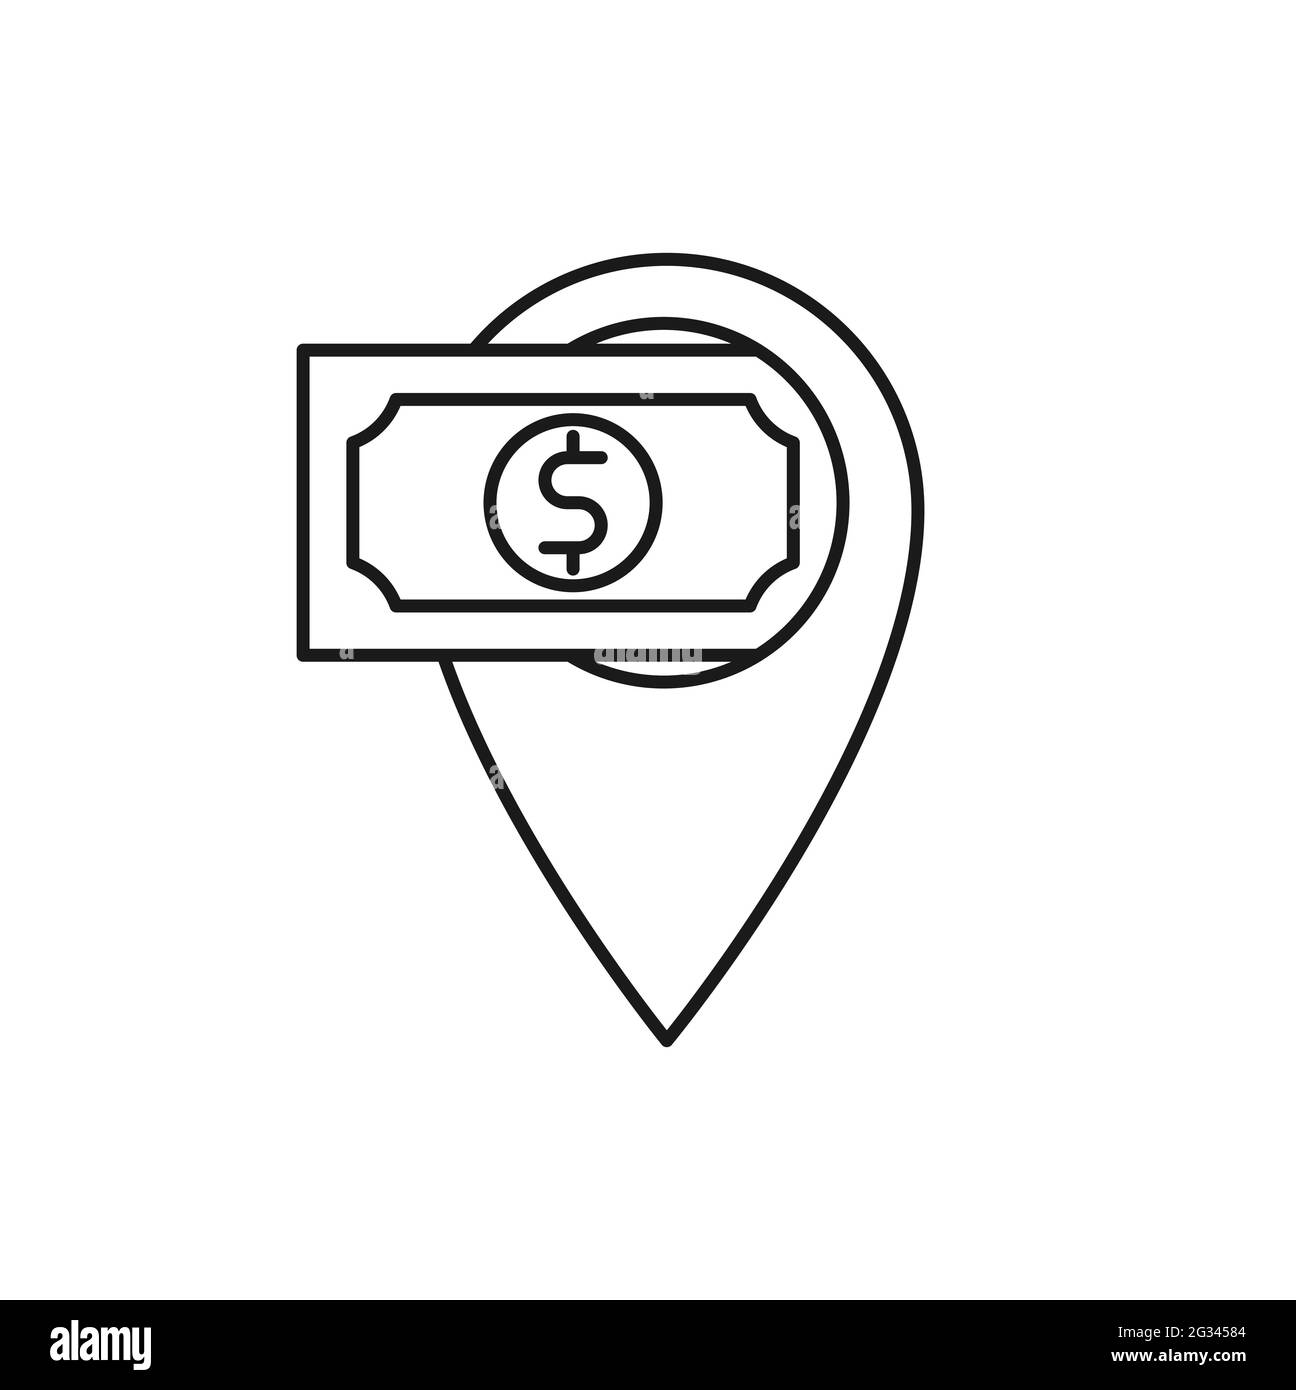 Money Location icon Vector Design. Money cash icon with Location Pin design concept for Banking, Finance, Currency and Trading Investment Business web Stock Vector